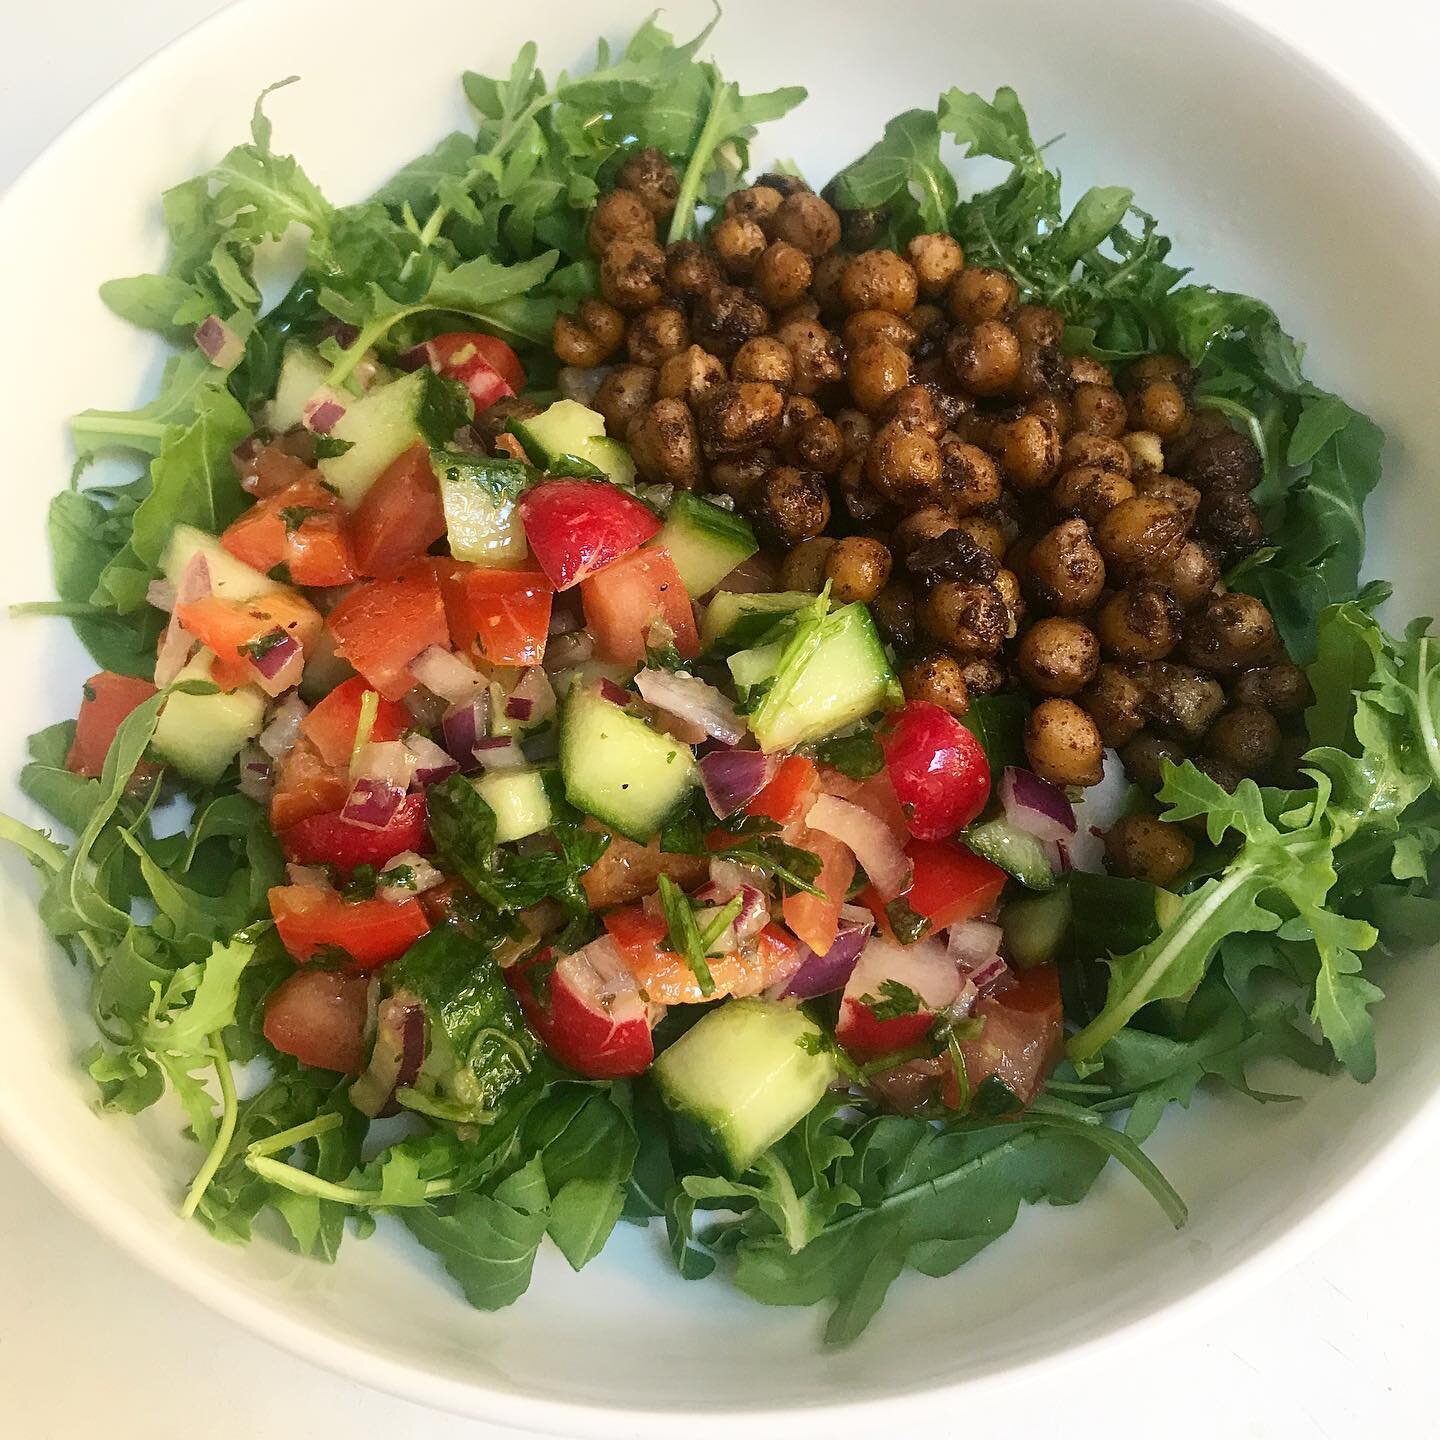 Spiced chickpea and fresh vegetables salad! #tomatoes #onions #peppers #coriander #parsley #radish #chickpeasalad #spices#healthyfood #greenwicheats #royalteas